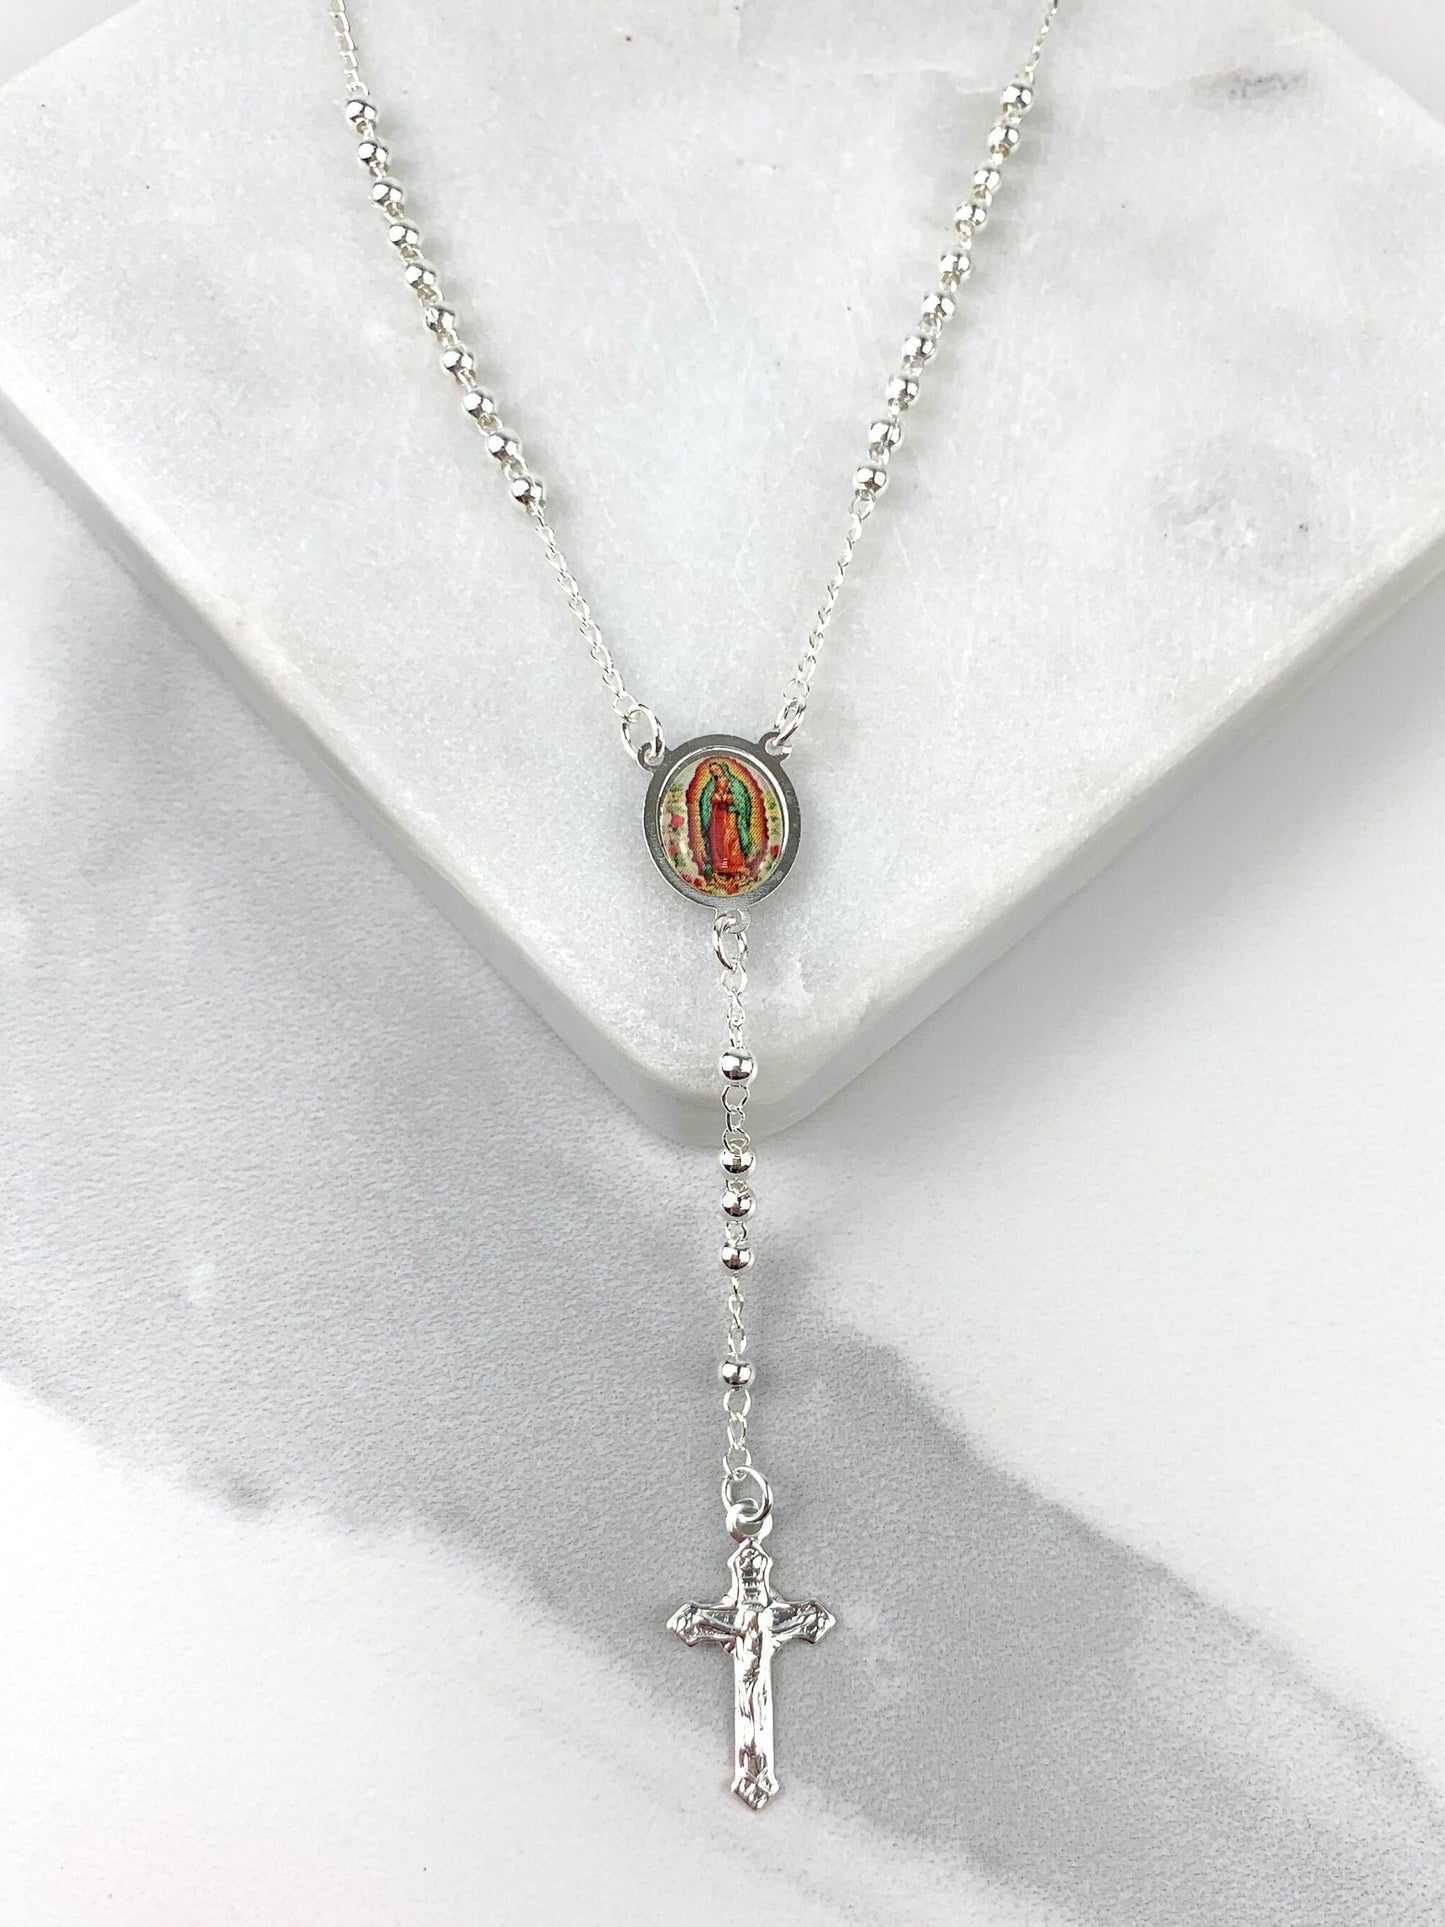 Silver Filled Beaded Chain Our Lady of Guadalupe Rosary Necklace, Religious Jewelry, Wholesale Jewelry Making Supplies